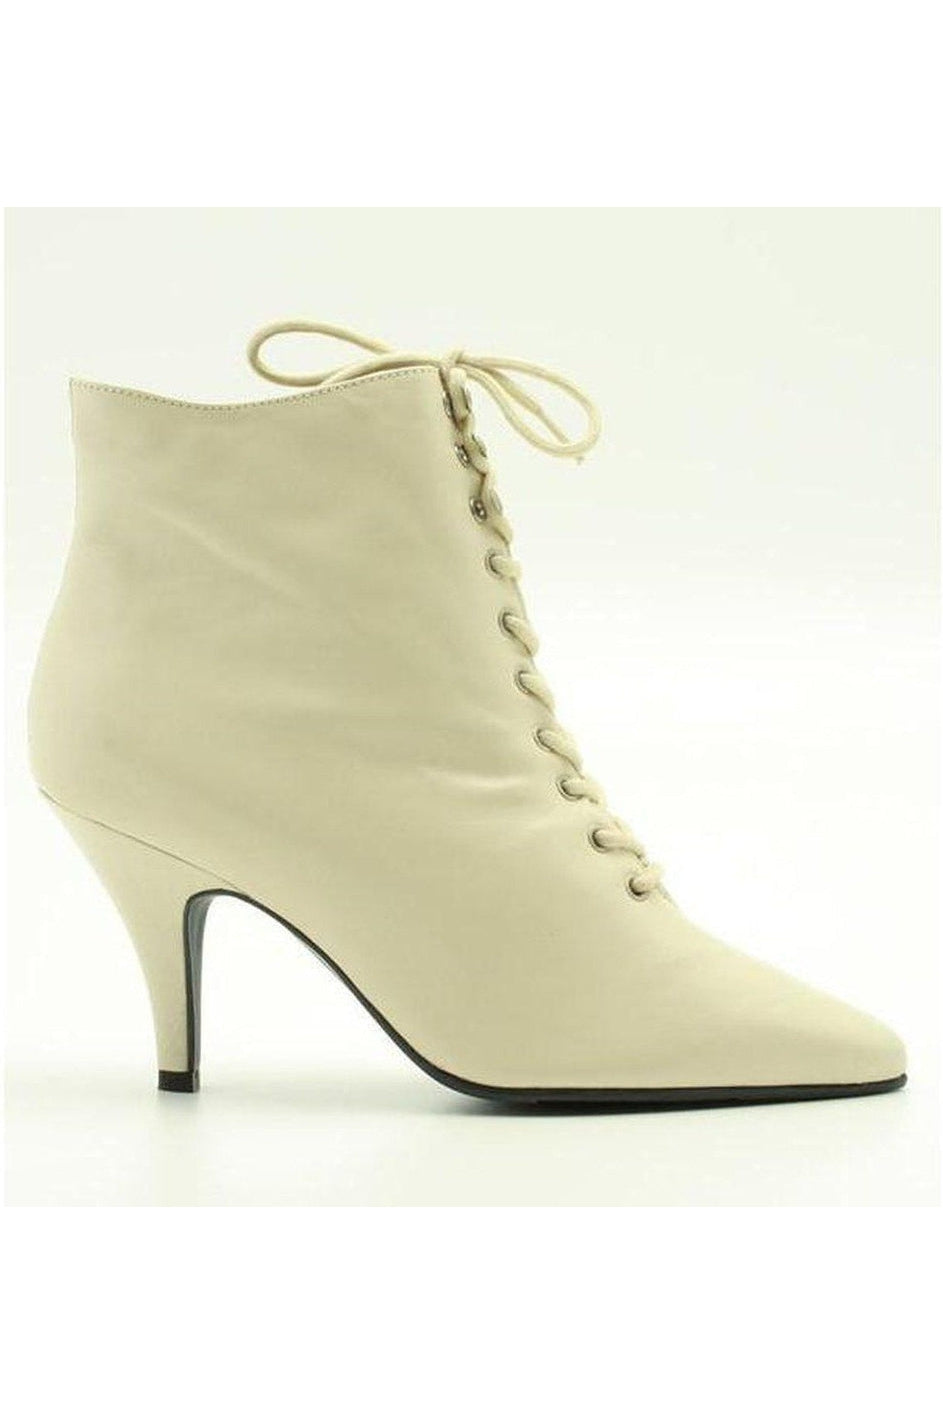 Lace Up Boot - Winter White Leather-Sexyshoes Brand-White-Ankle Boots-SEXYSHOES.COM